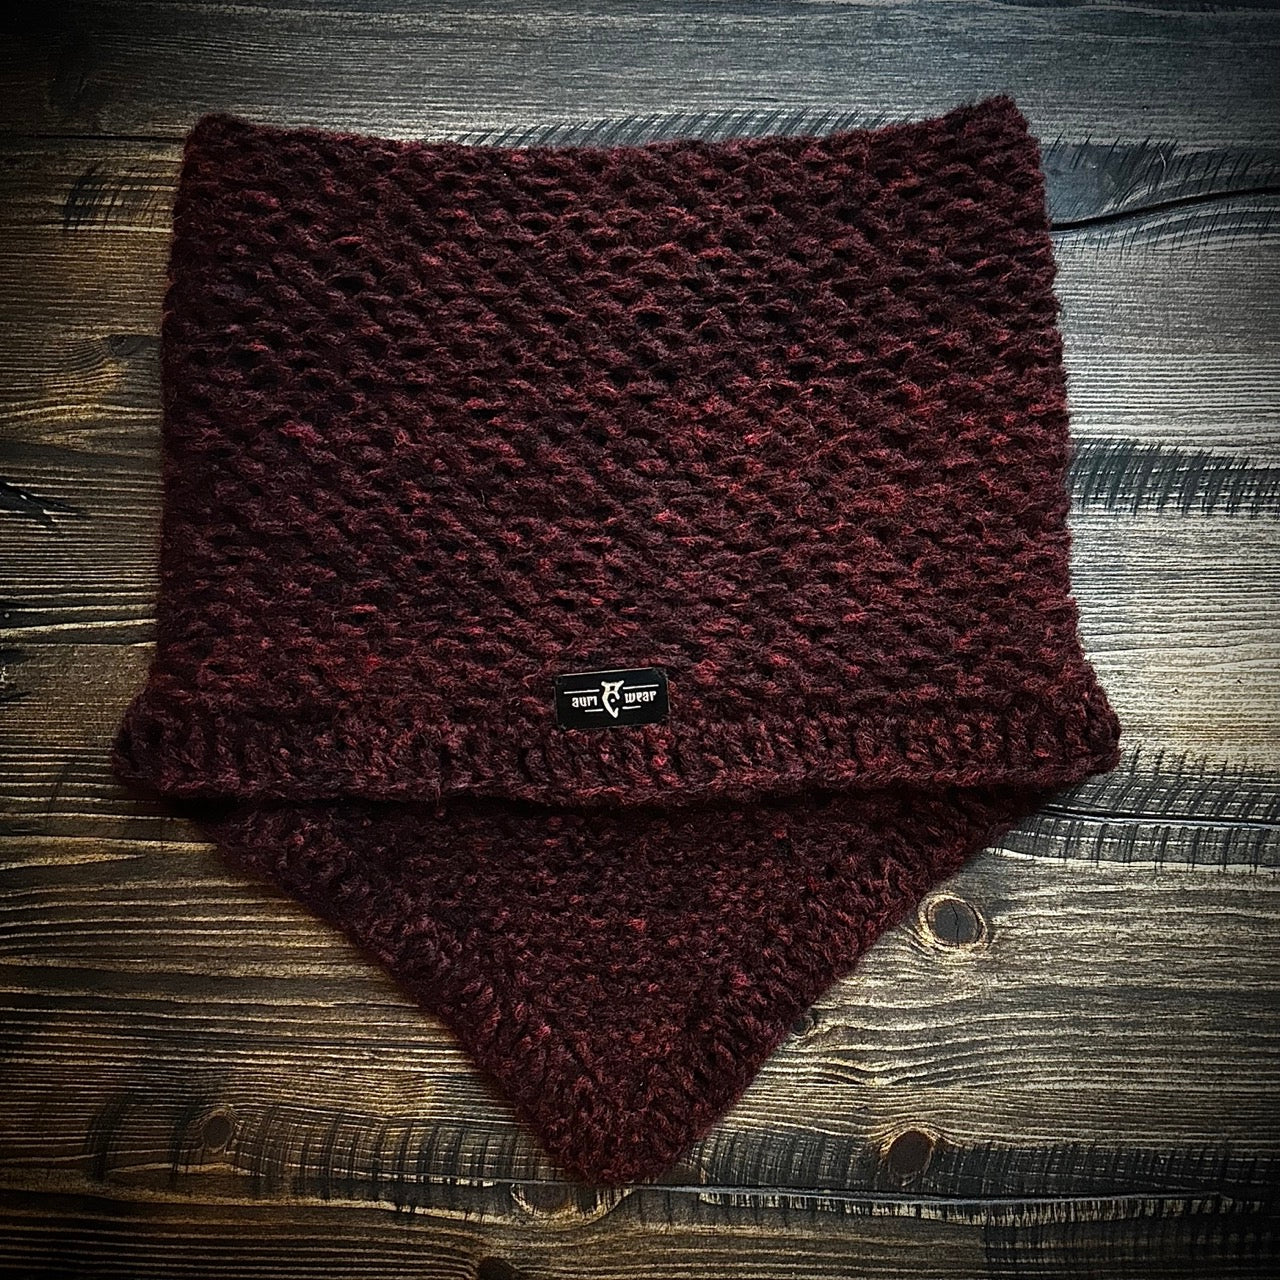 Handmade knitted earthy red cowl